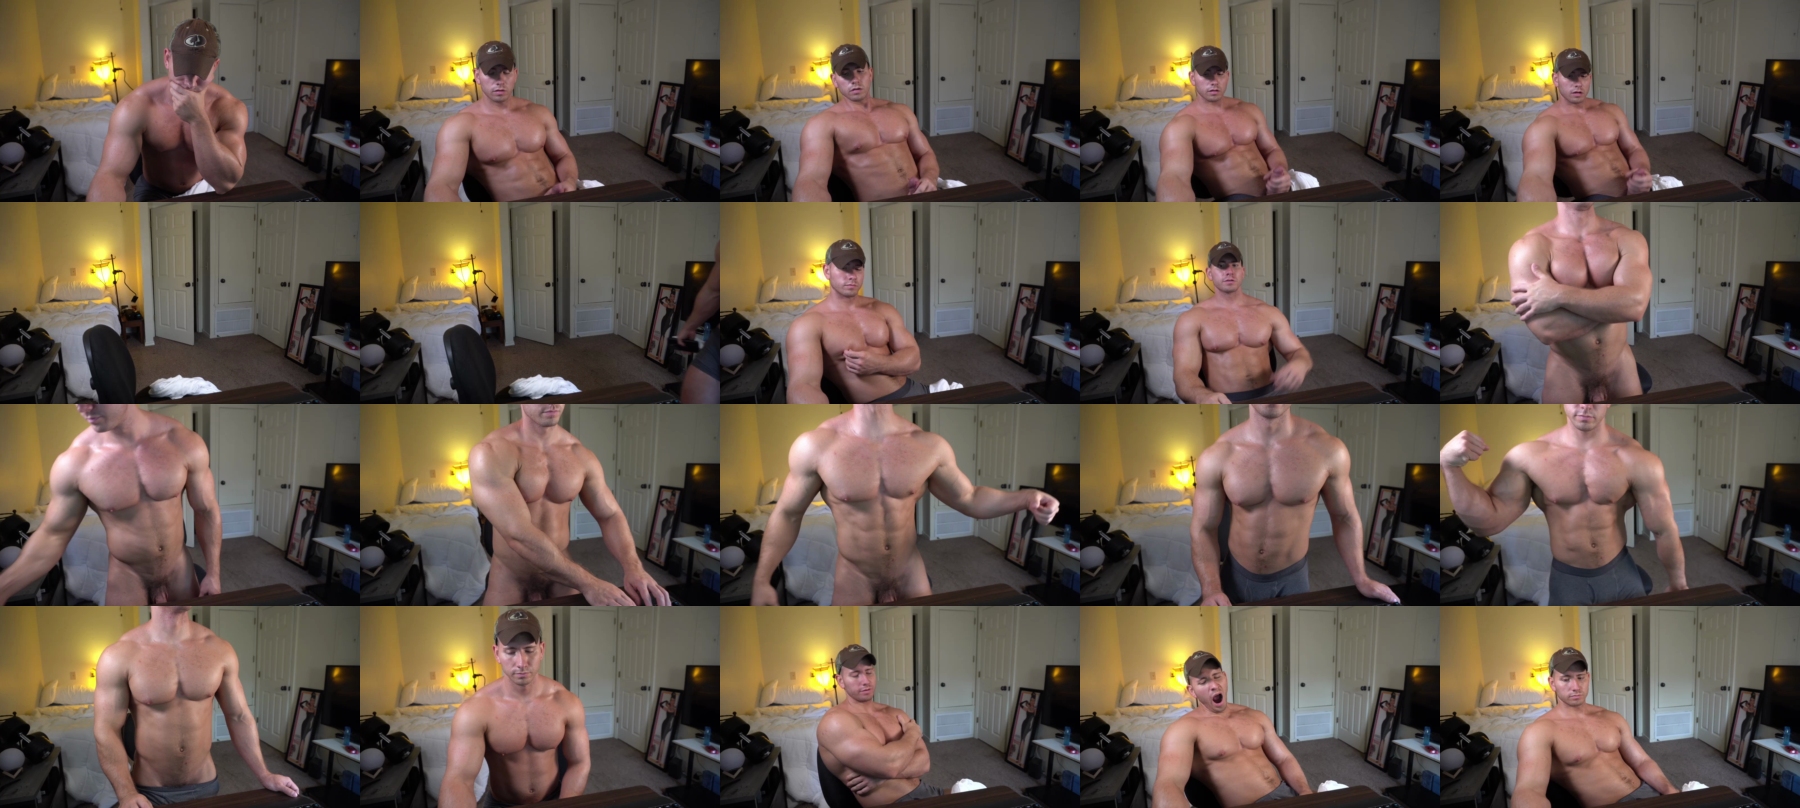 Hotmuscles6t9 Porn CAM SHOW @ Chaturbate 16-07-2021